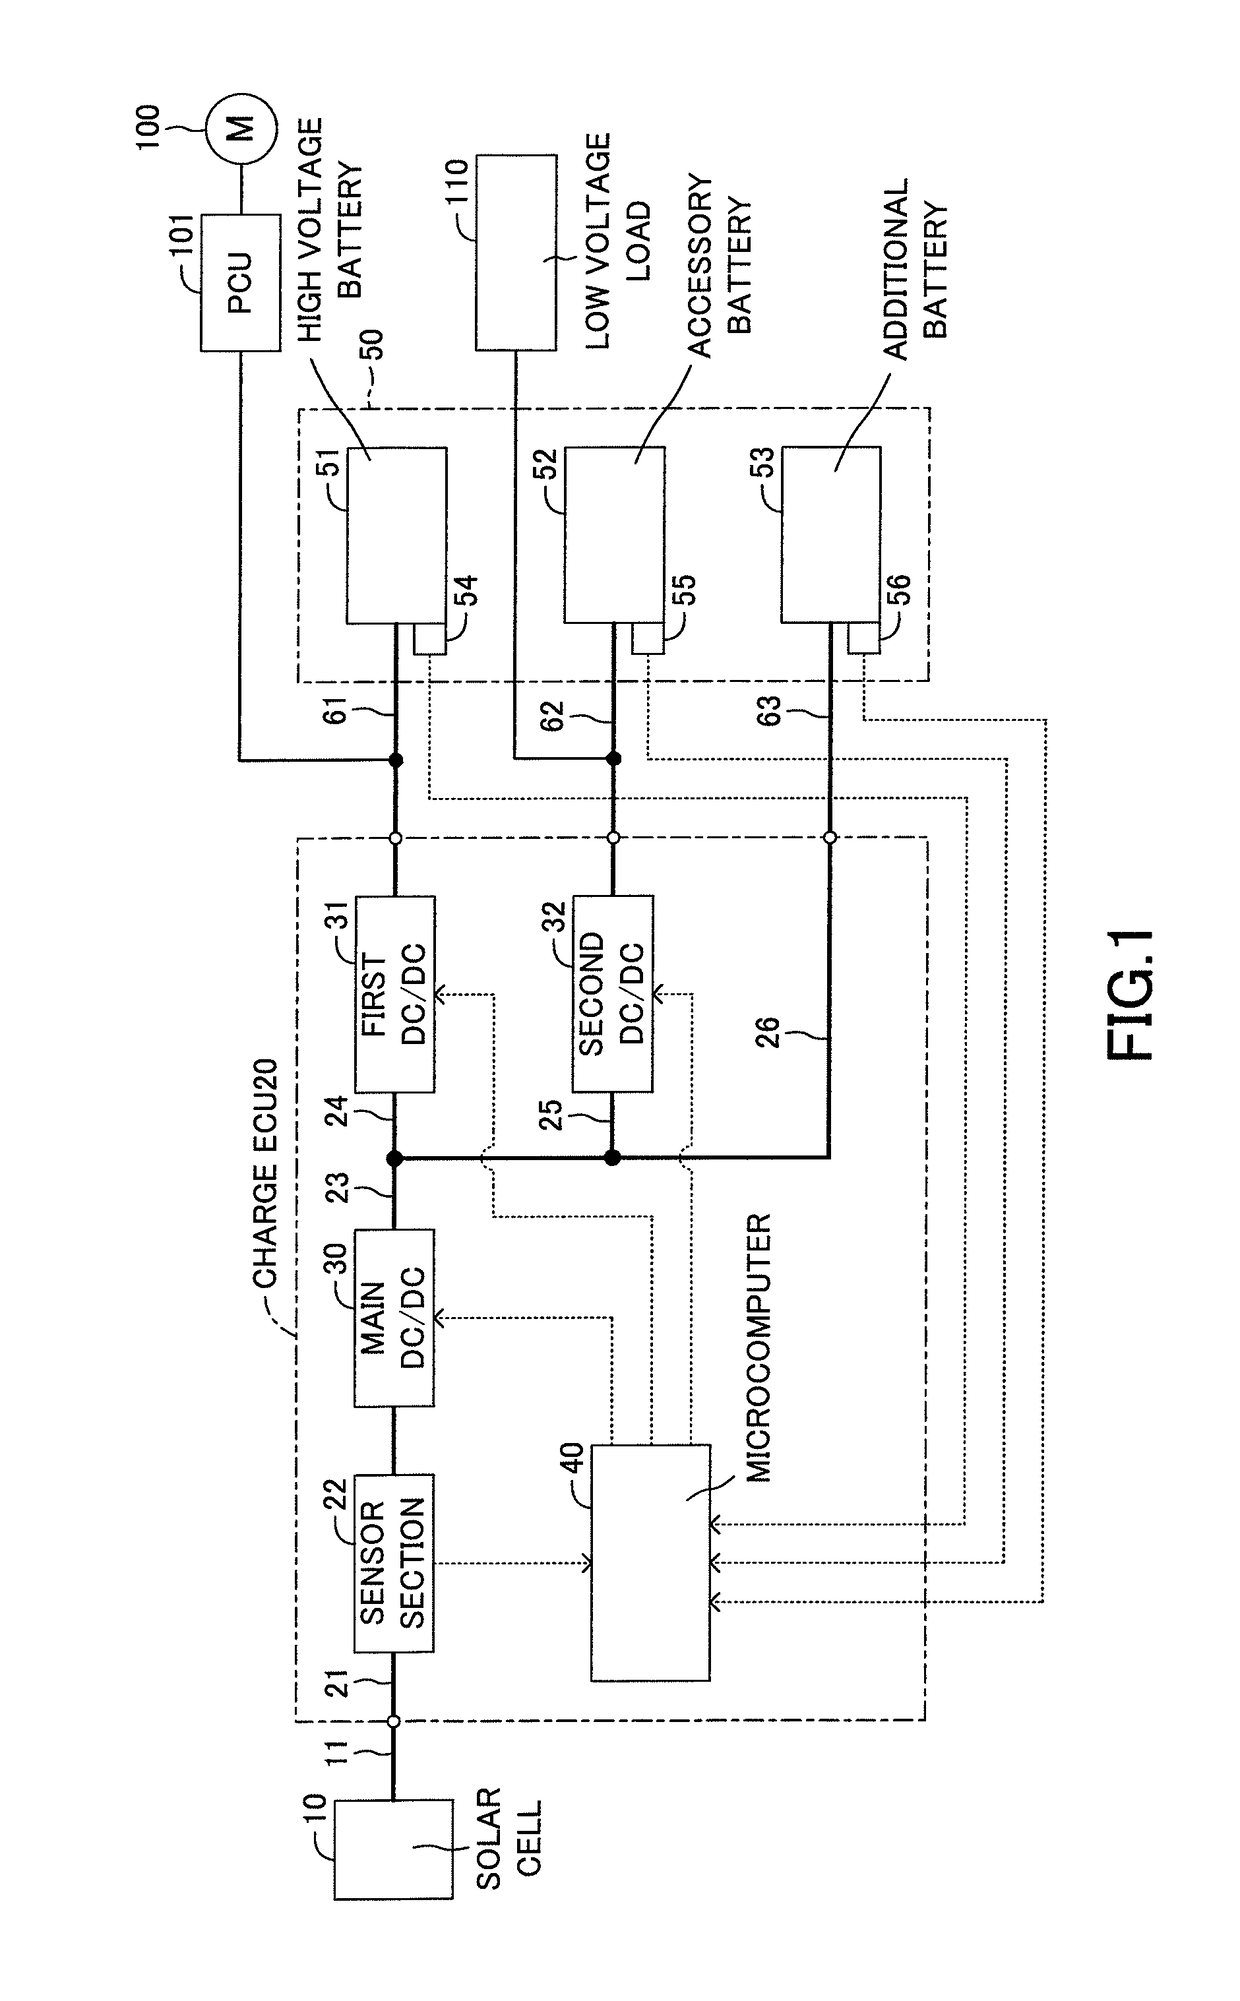 Charge control device